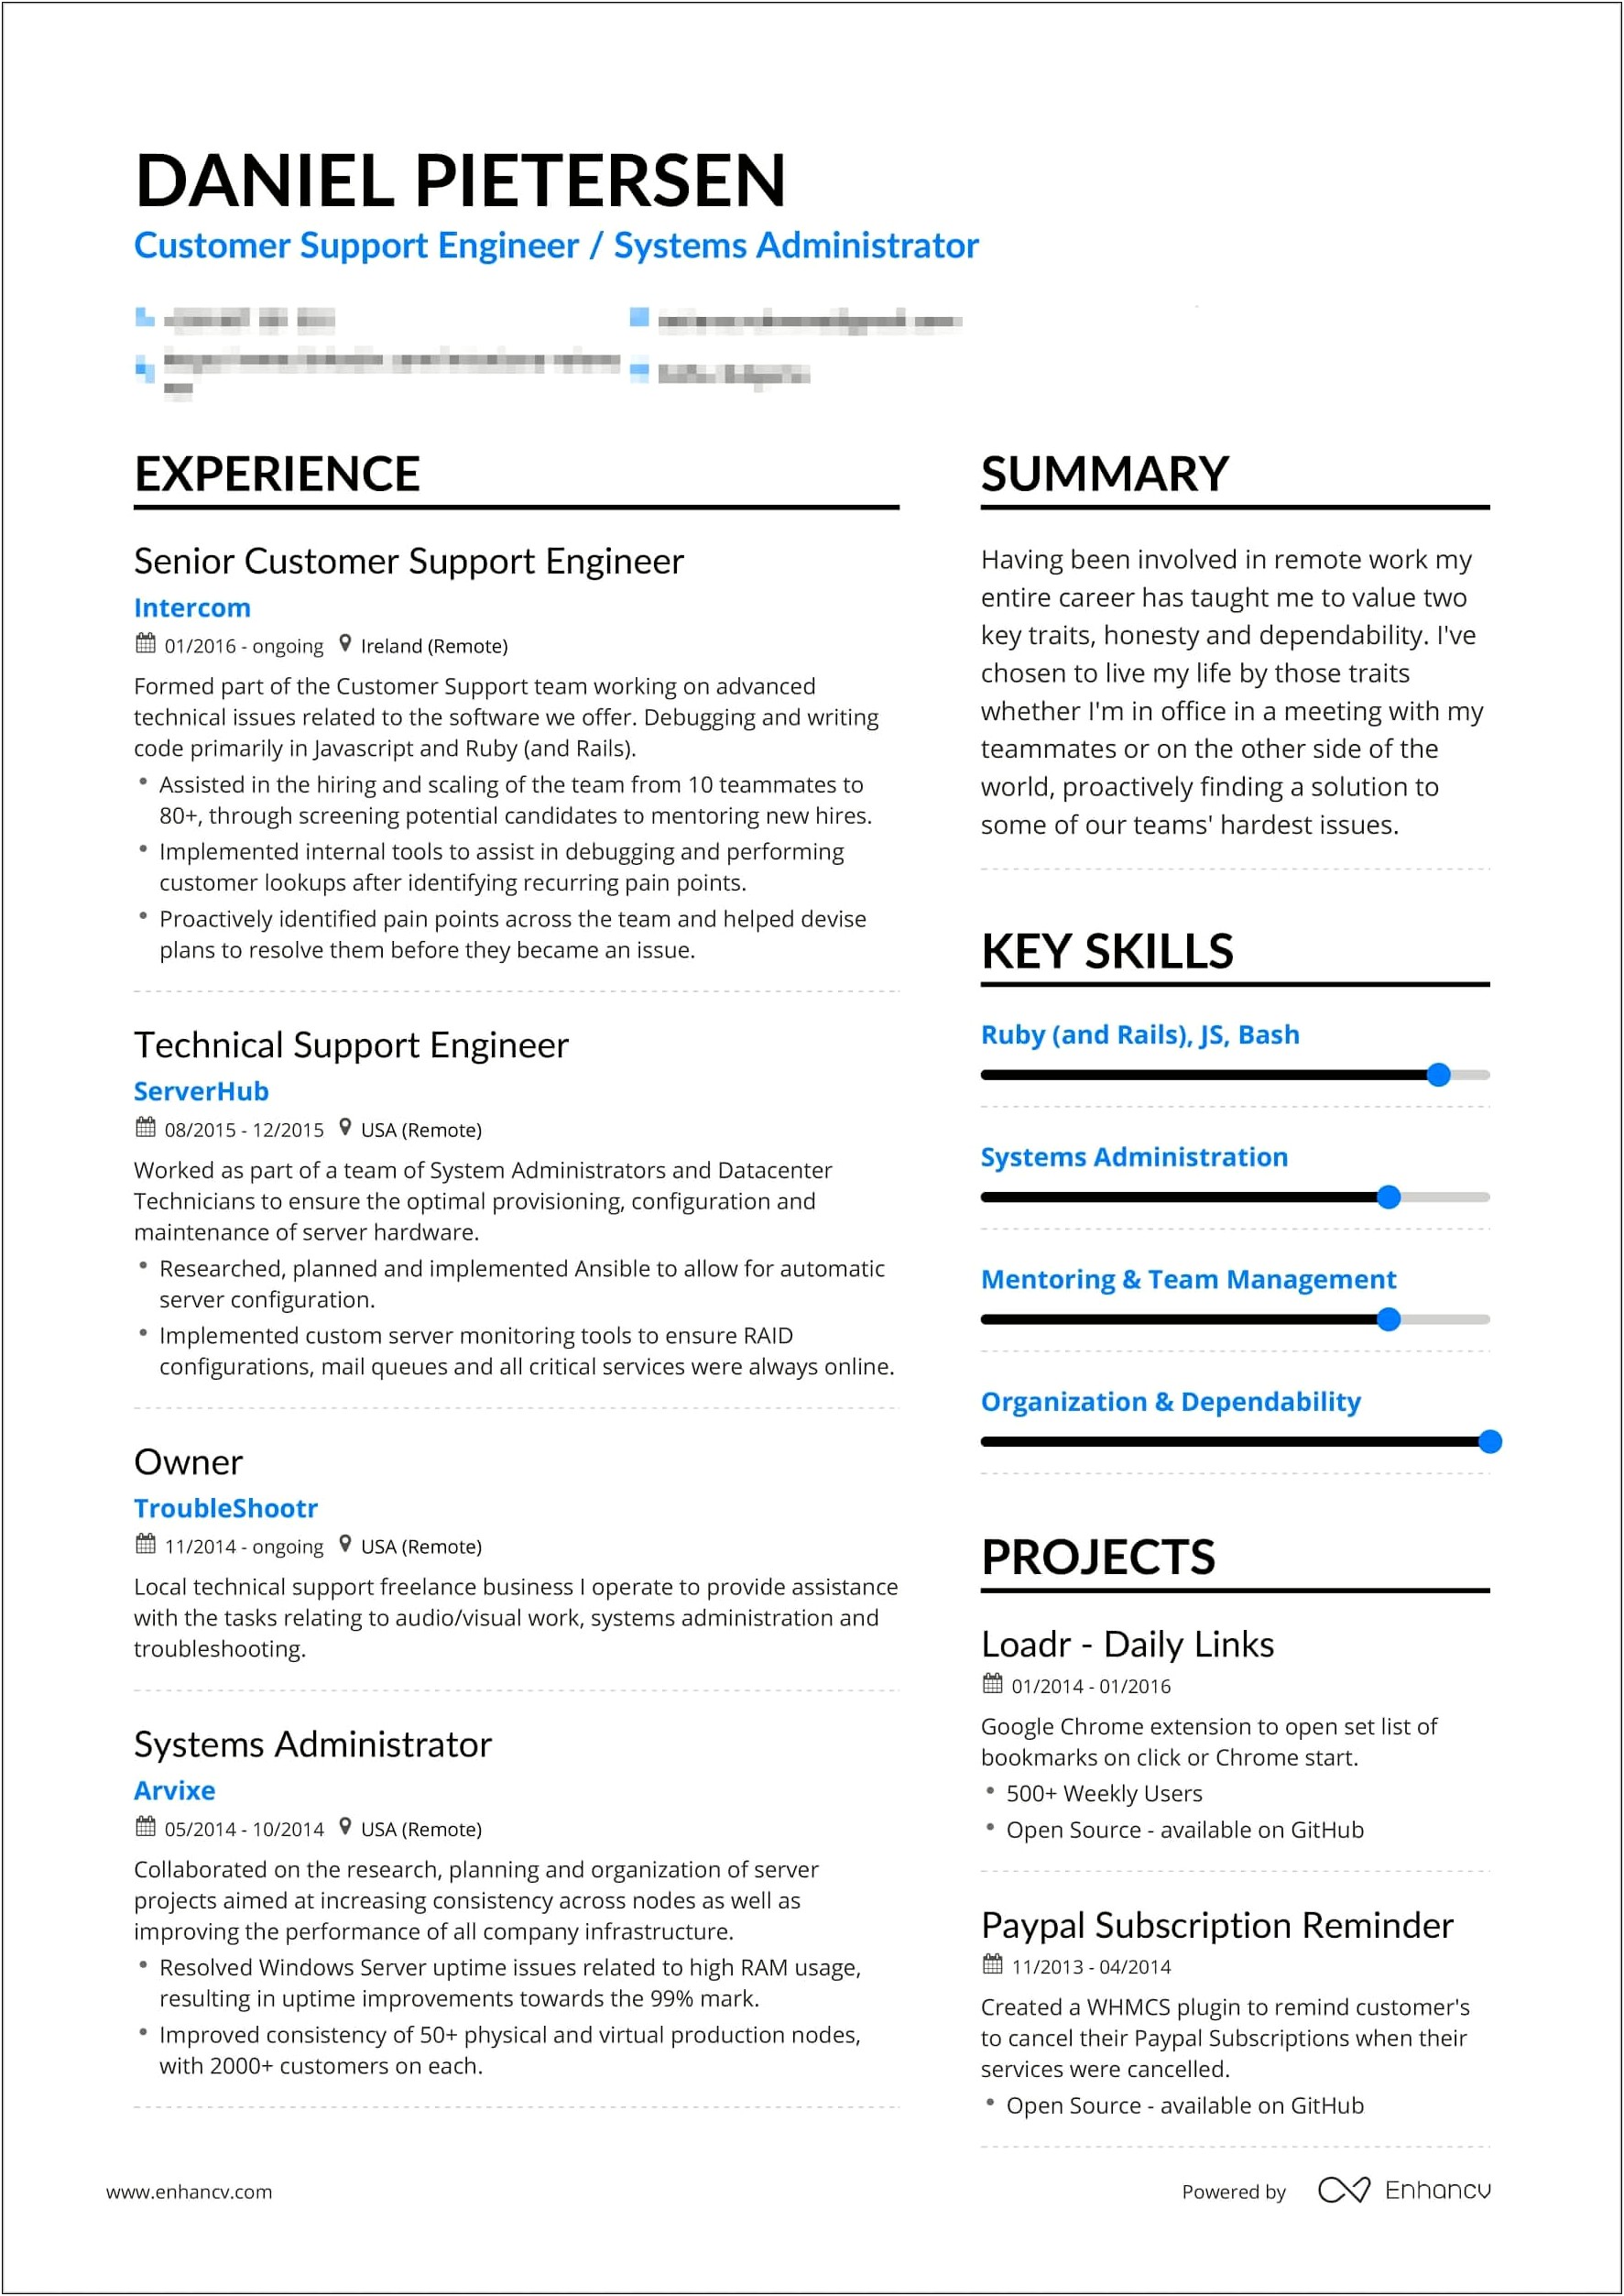 Resume Length For 10 Years Experience